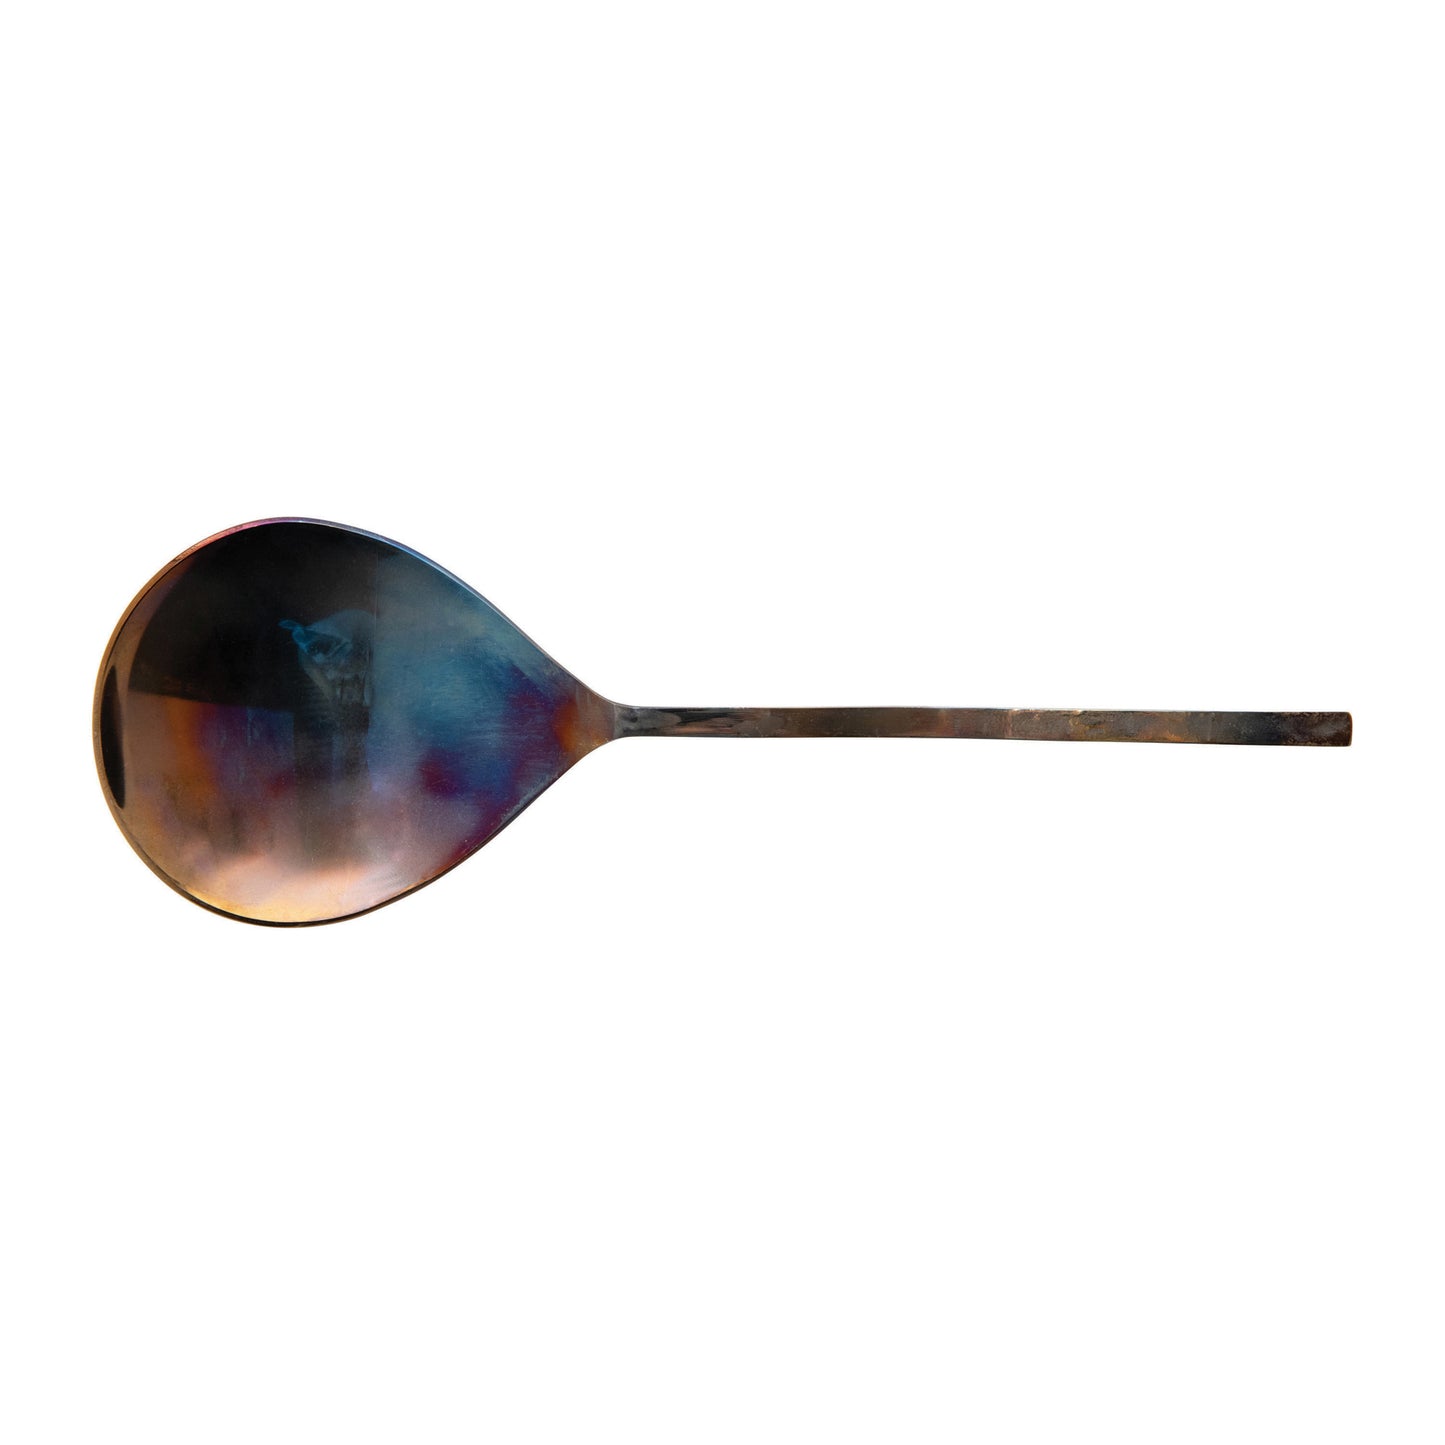 Hand-Forged Stainless Steel Serving Spoon